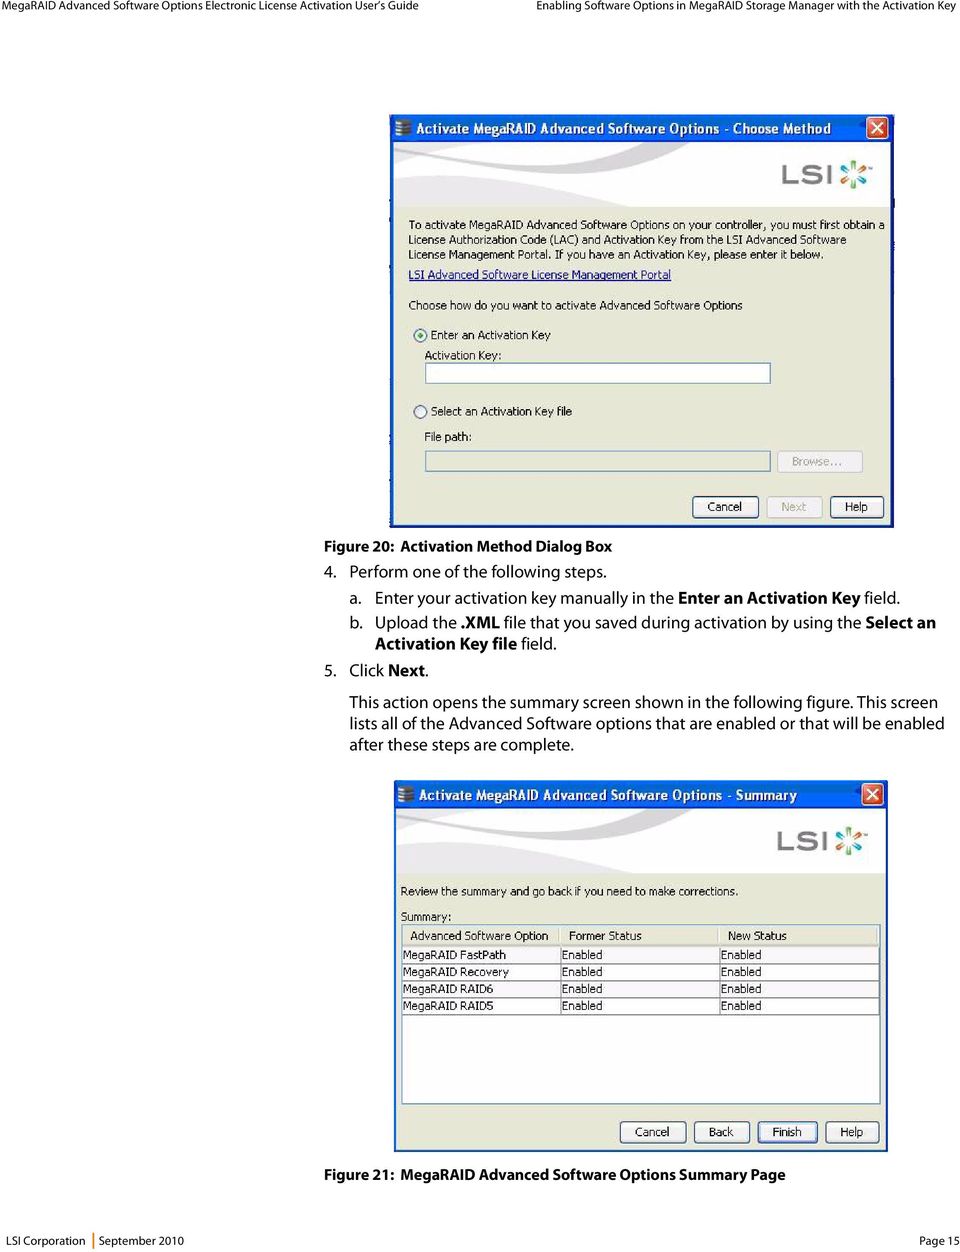 xml file that you saved during activation by using the Select an Activation Key file field. 5. Click Next. This action opens the summary screen shown in the following figure.